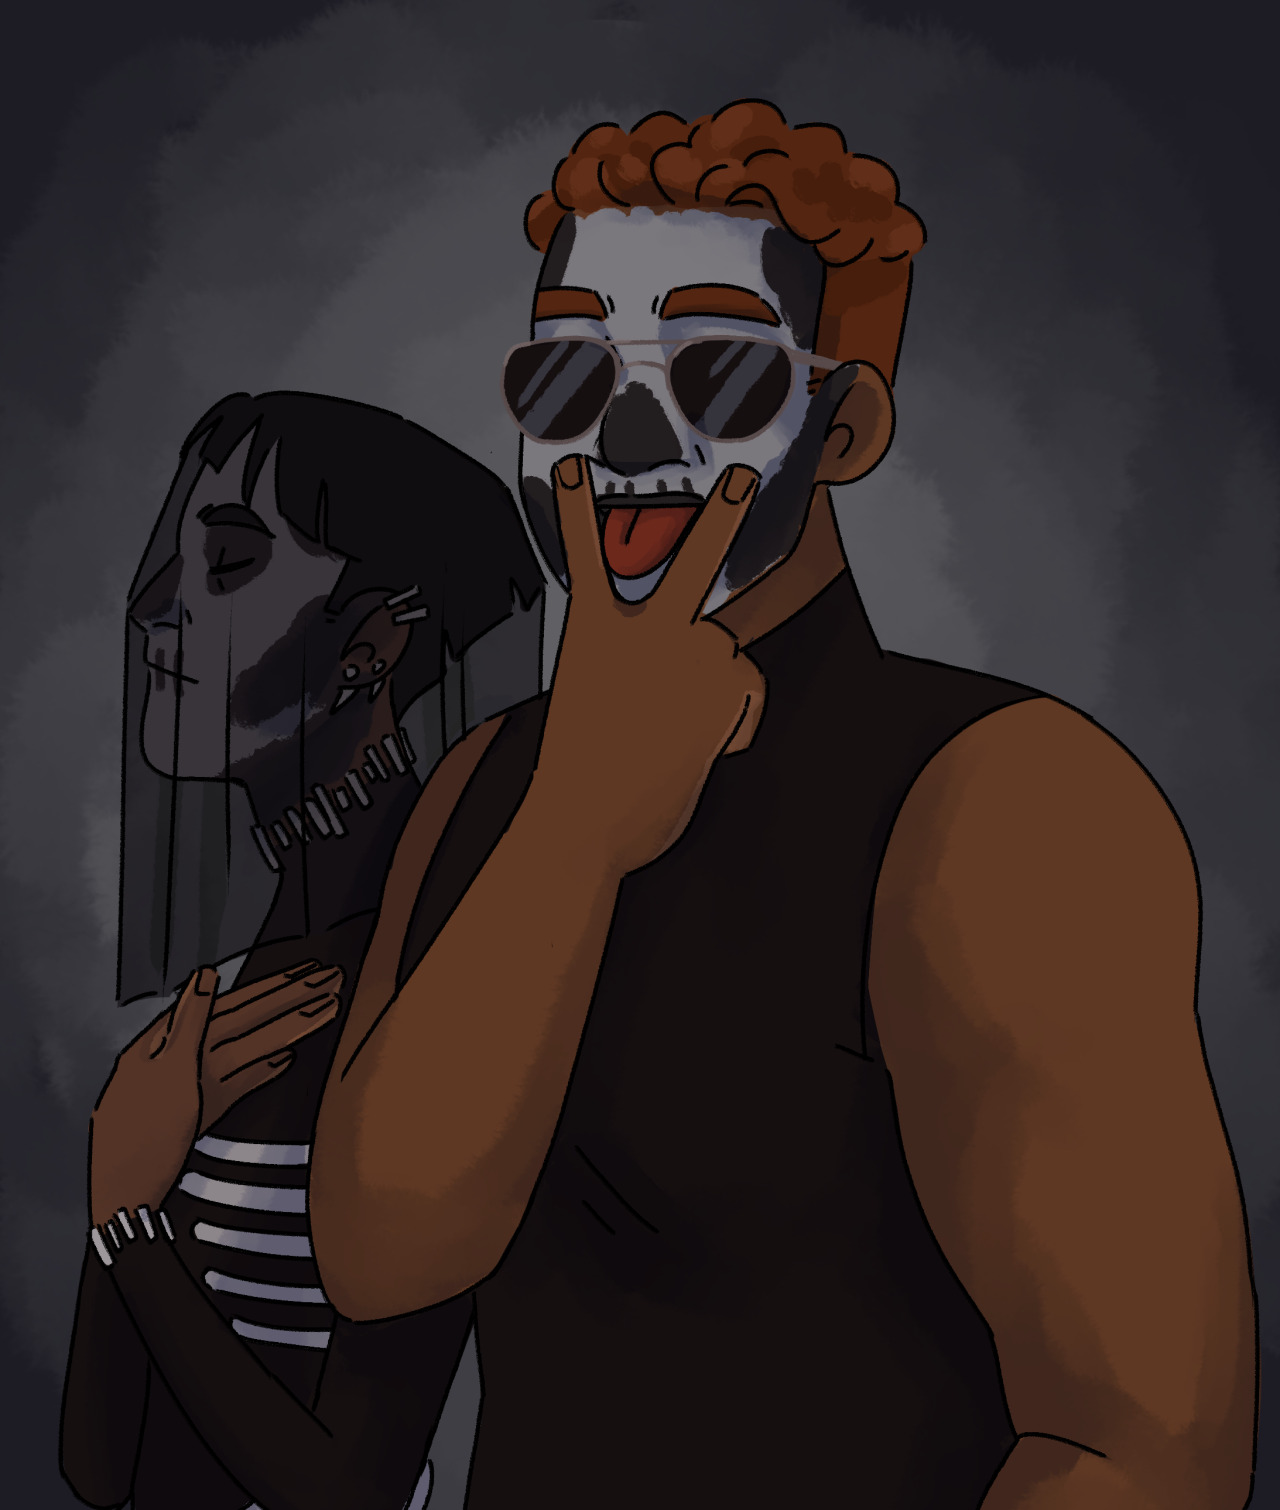 [ID:  A waist-up digital illustration of Gideon Nav  and Harrowhark Nonagesimus from the locked tomb series. Both are wearing skull face paint. Harrow stands in profile looking solemn with her arms crossed over her chest. She is wearing a veil. Gideon is turned towards the viewer, sticking her tongue out between her fingers. She is wearing mirrored sunglasses. End ID.]She is a menace 😩 #griddlehark#gideon nav#harrowhark nonagesimus#ninth house#9th house#tlt #the locked tomb  #gideon the ninth  #harrow the ninth #gideon#harrow#oceanarts